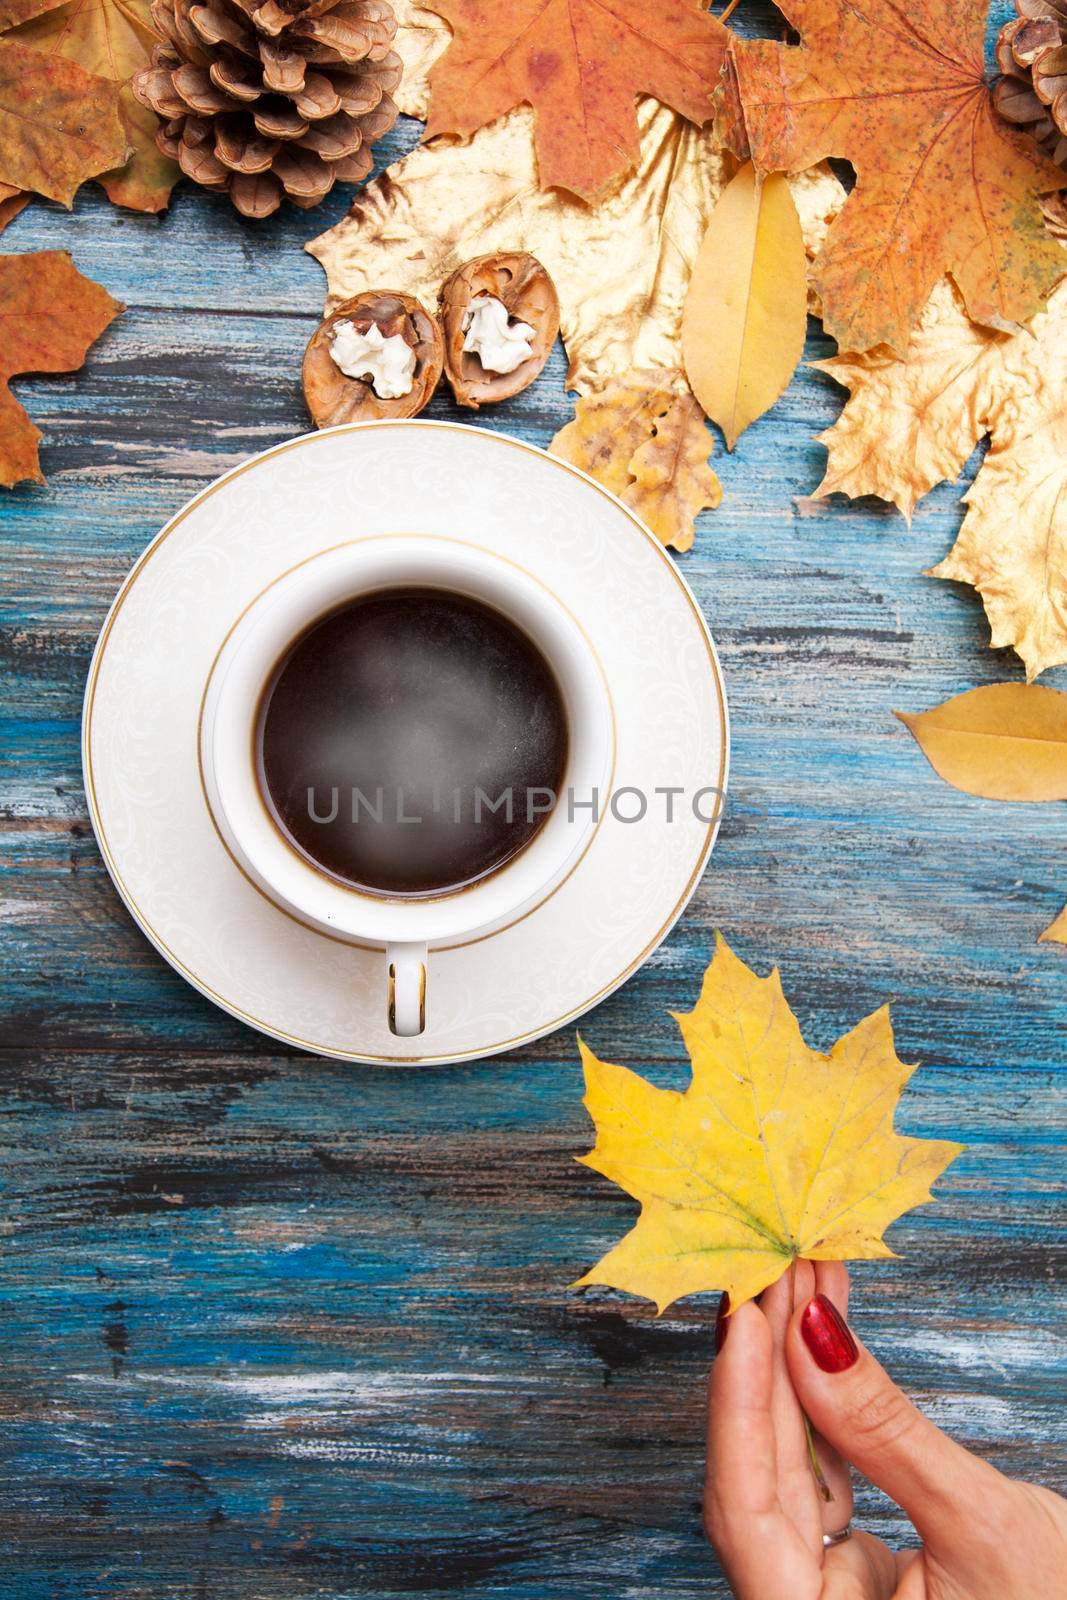 Hot coffee on a wooden table, in the hand of a girl - autumn yellow maple leaf by ssvimaliss